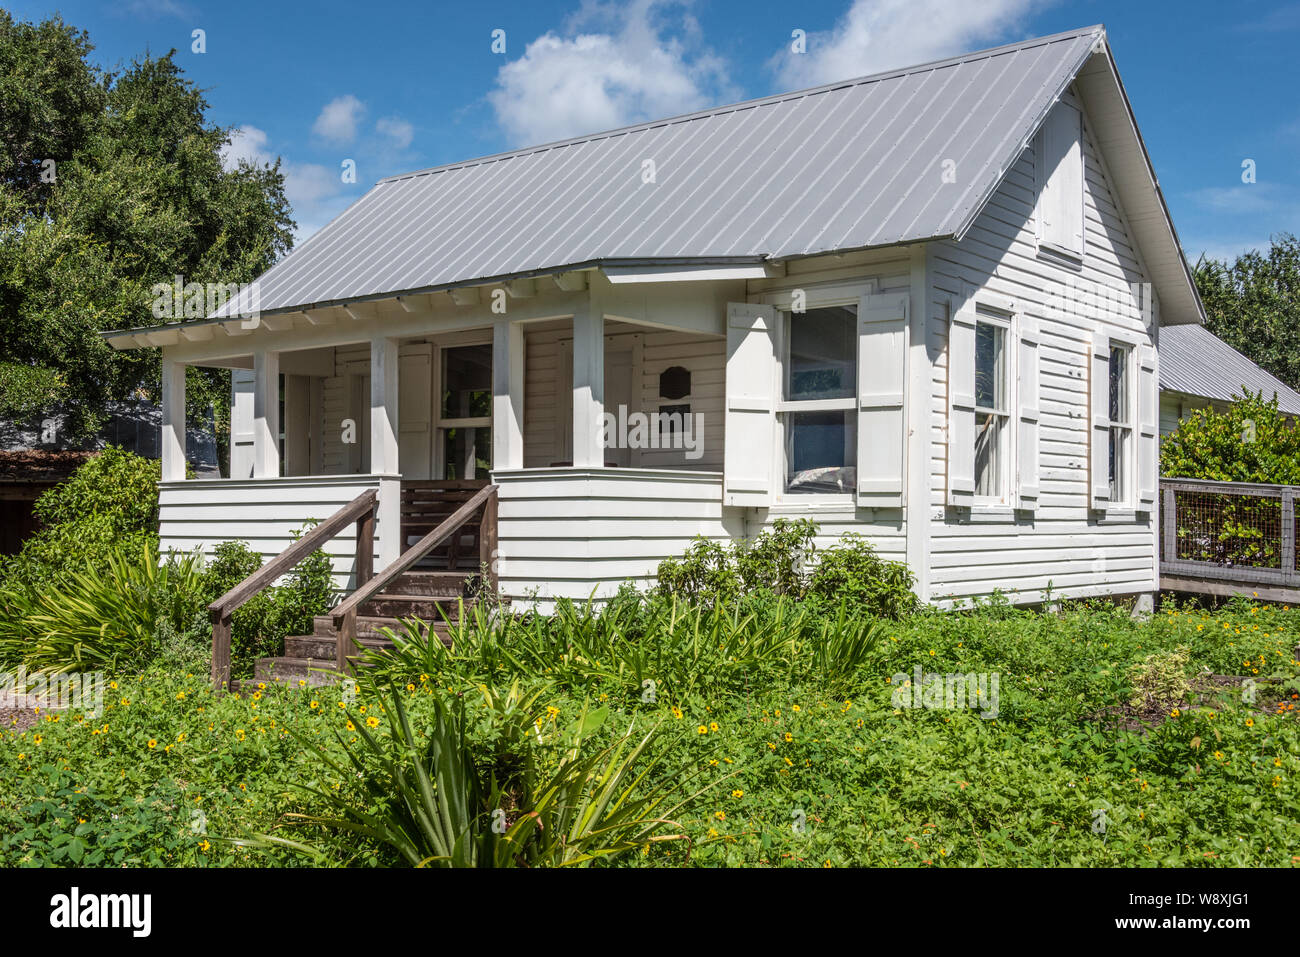 Tindall Pioneer Homestead, a cracker-style house built by George Tindall in 1892 and considered the oldest existing home in Palm Beach County, FL. Stock Photo